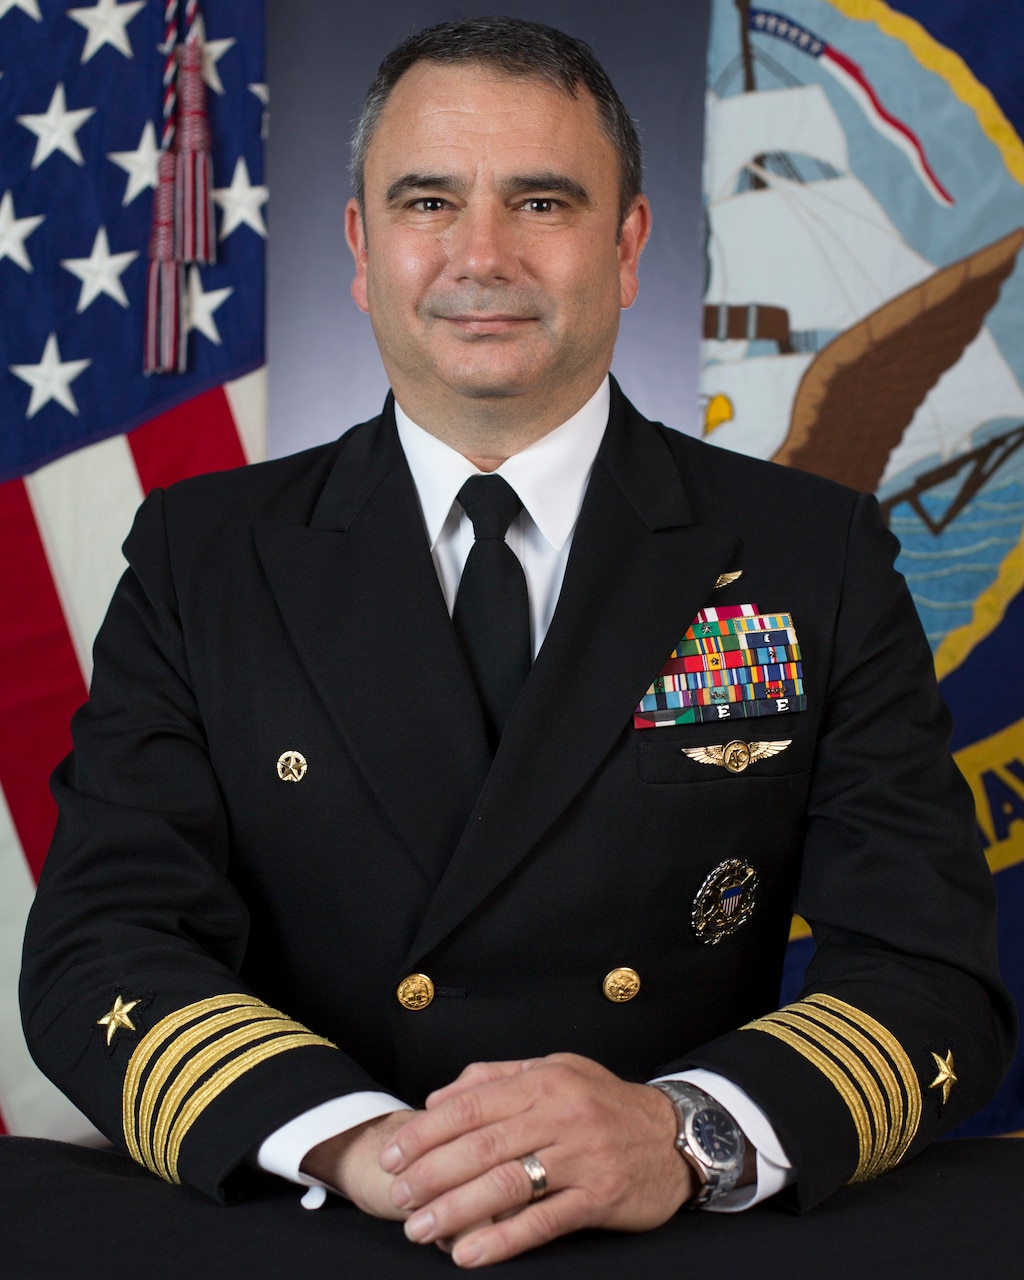 Official studio photo of Capt. Sean P. Knight, Commanding Officer, USS Kearsarge (LHD 3)